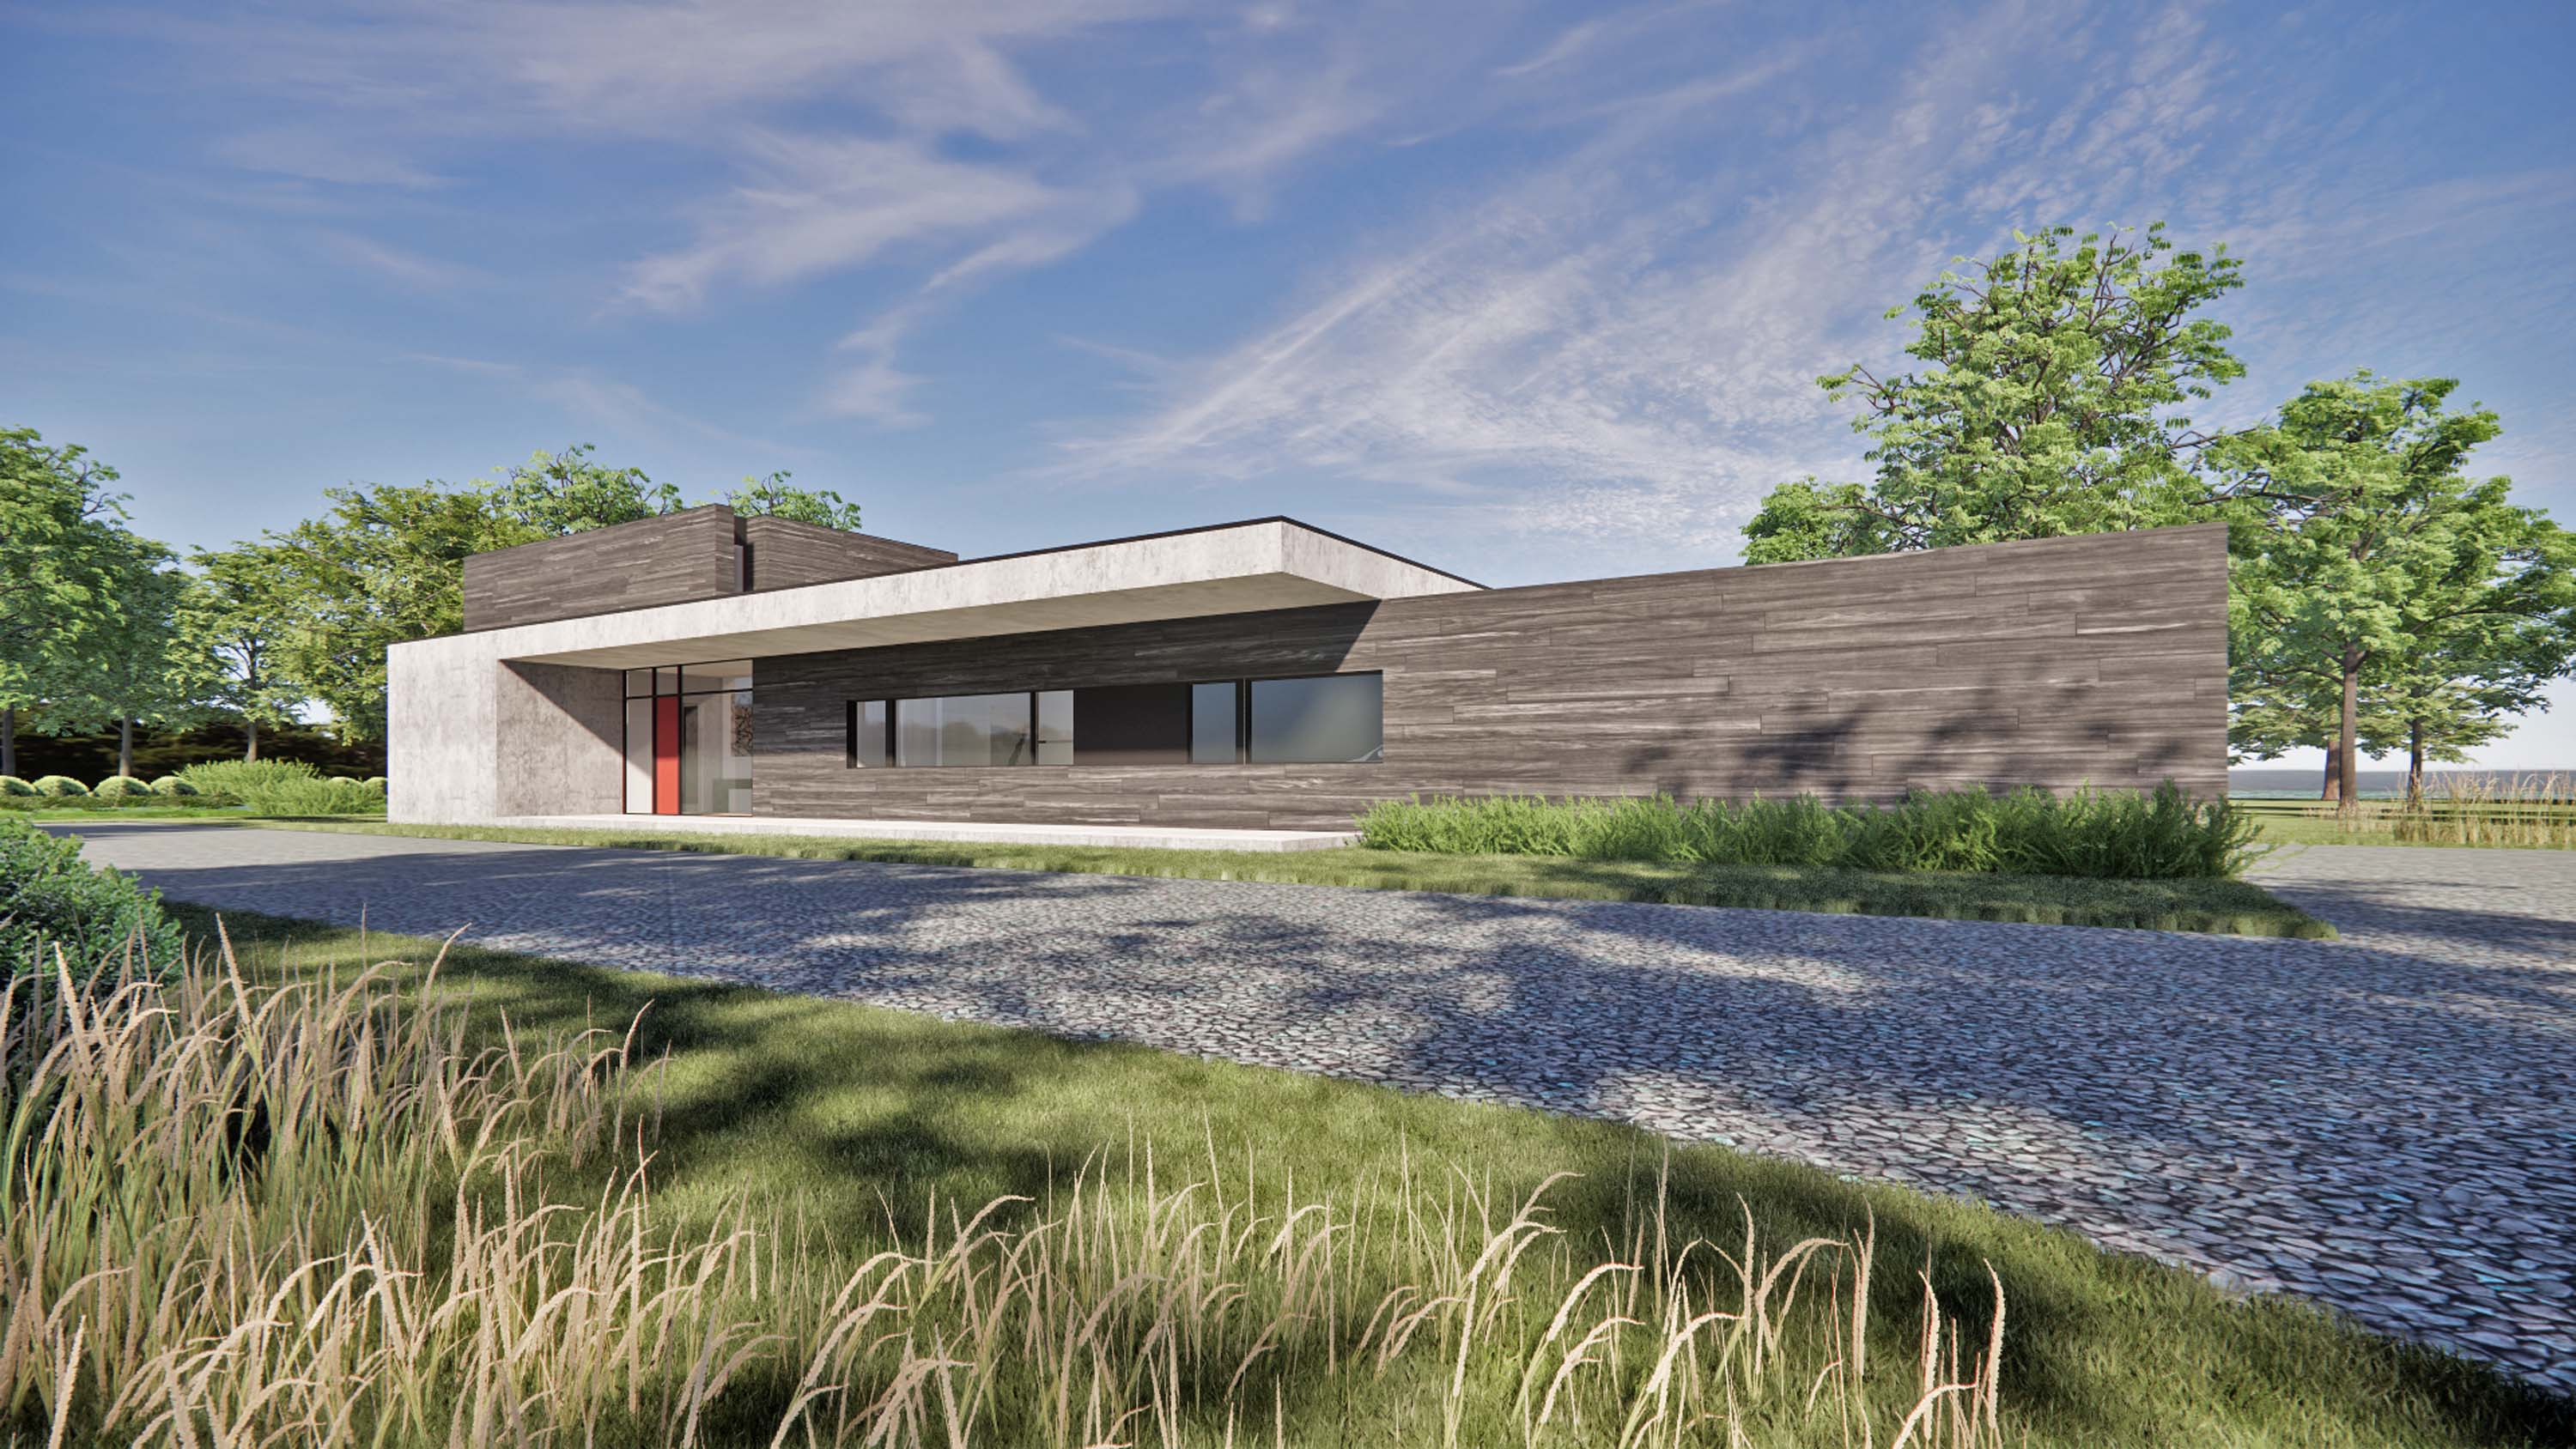 Street-facing exterior rendering of Log Tavern Pond House by Specht Novak Architects featuring long, low proportions, a cantilevered roof, and natural materials.